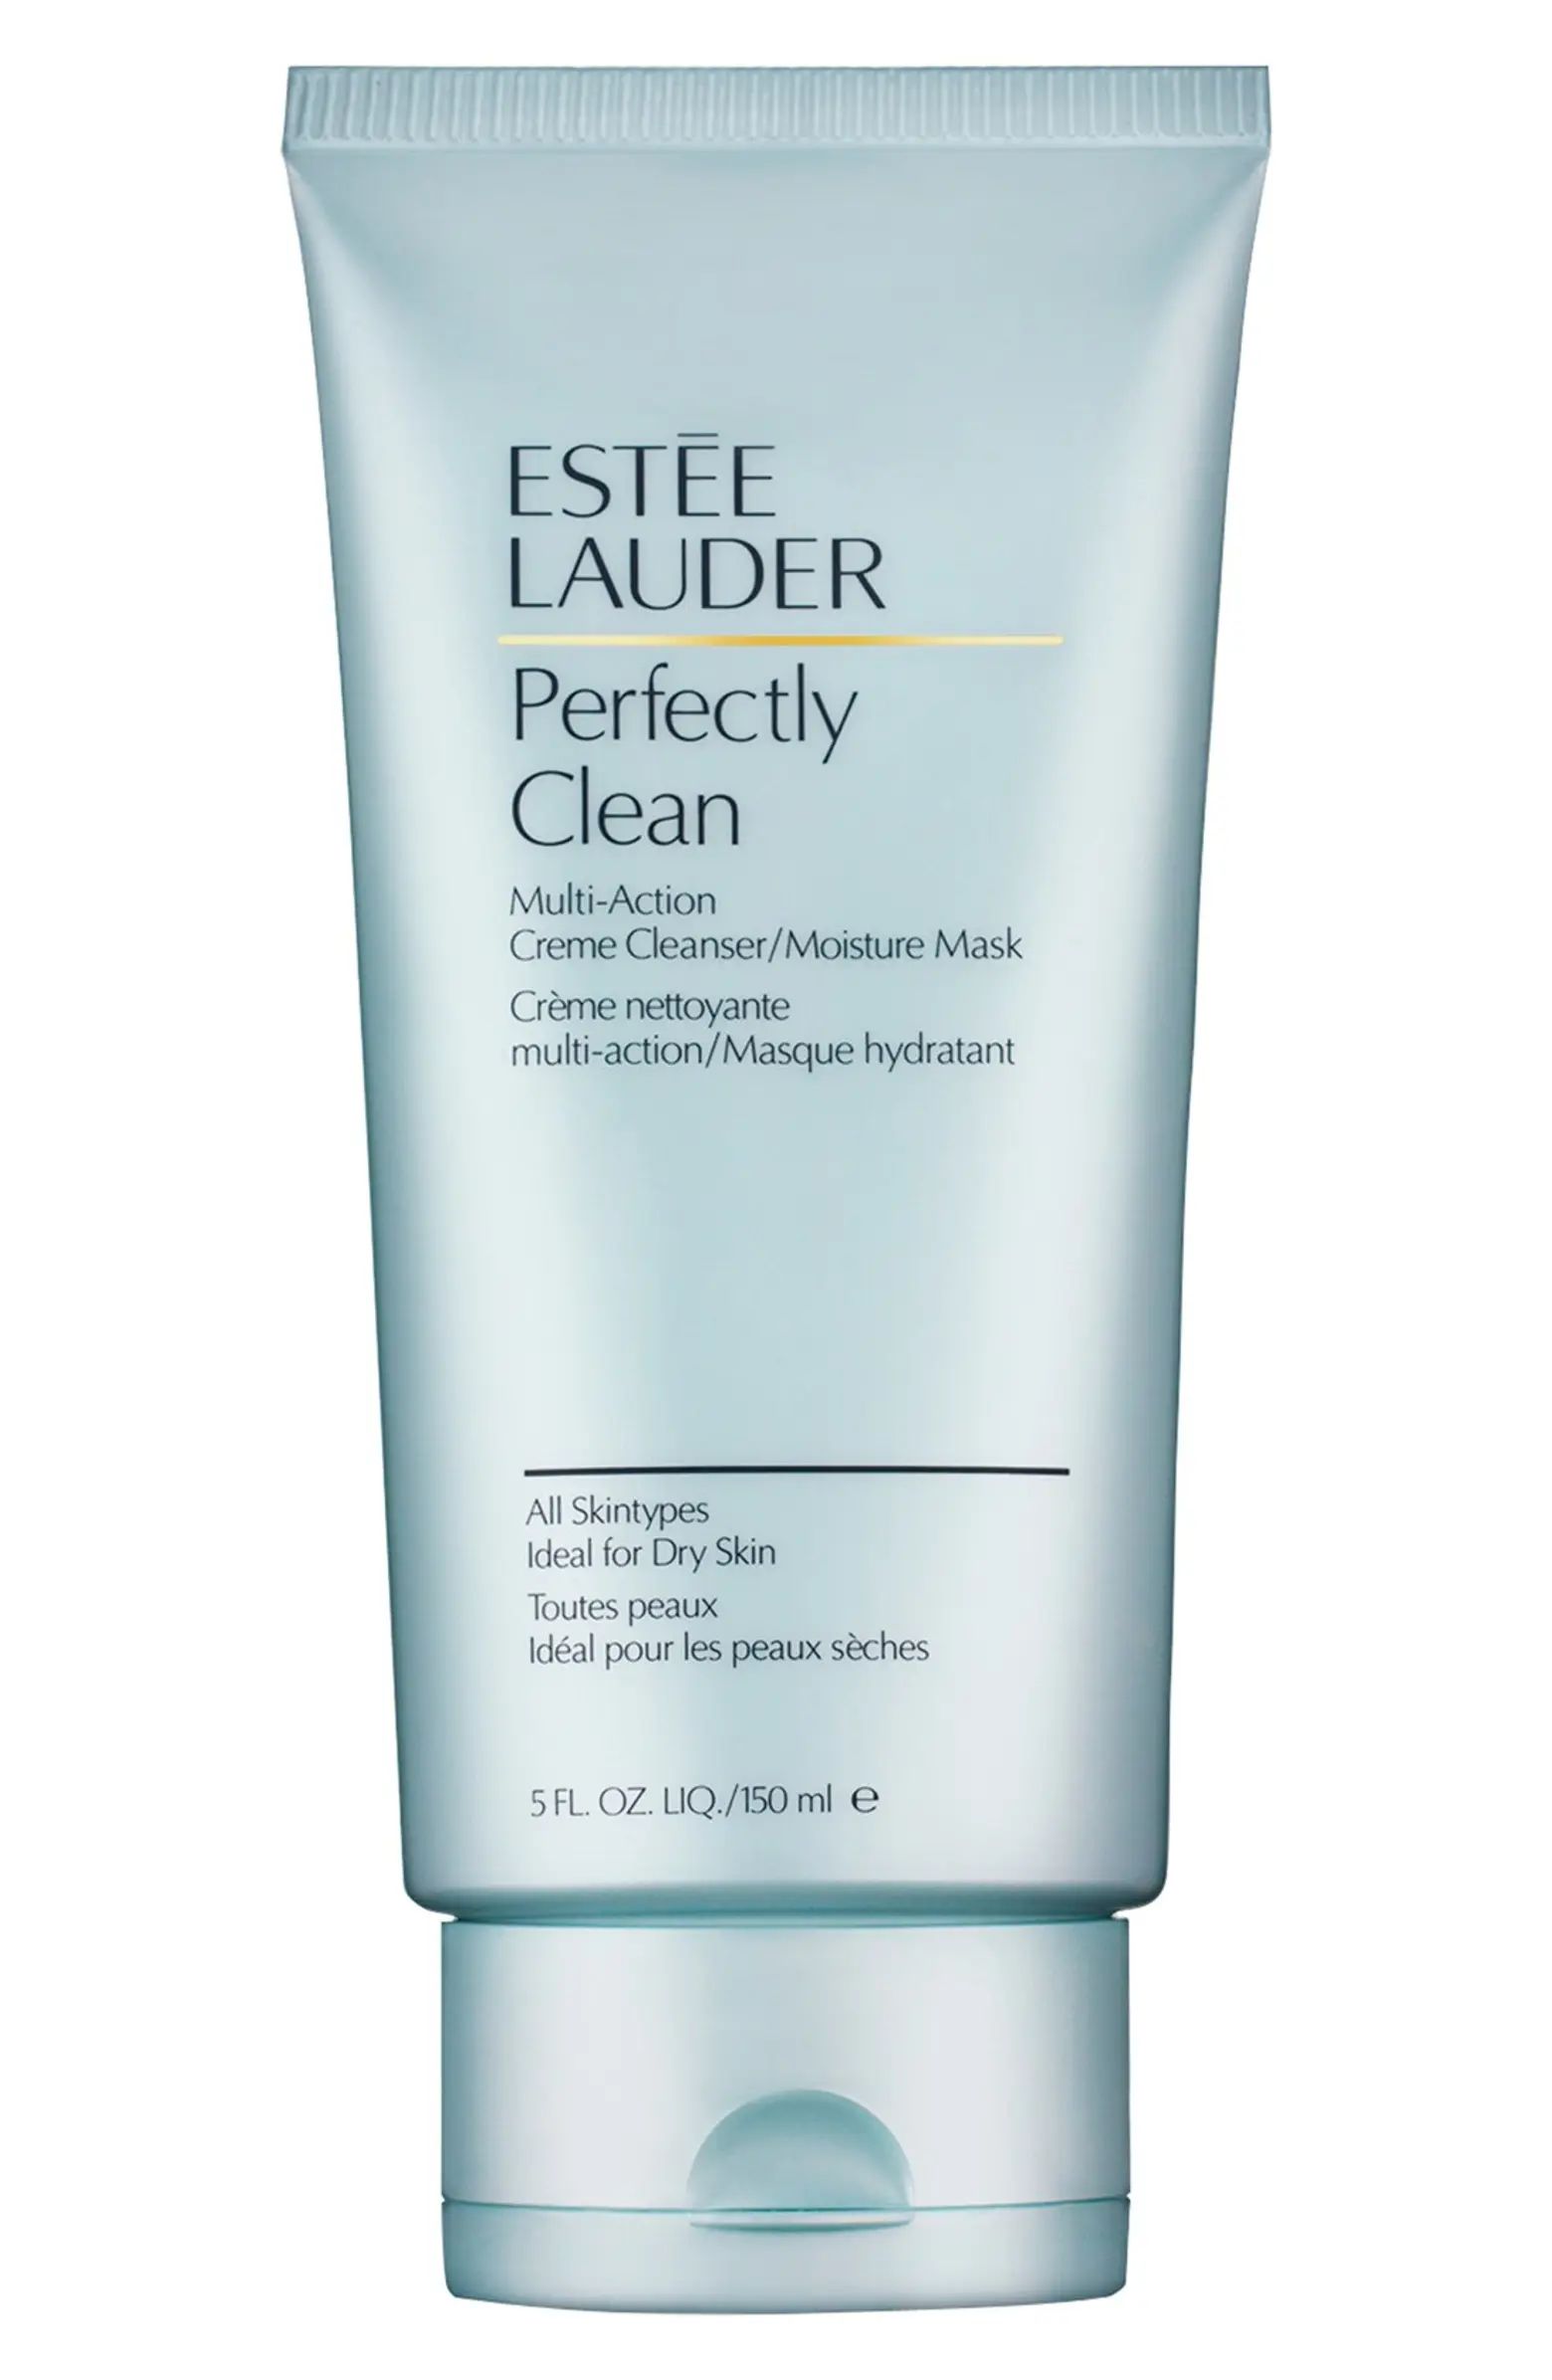 Perfectly Clean Multi-Action Creme Cleanser/Moisture Mask | Nordstrom